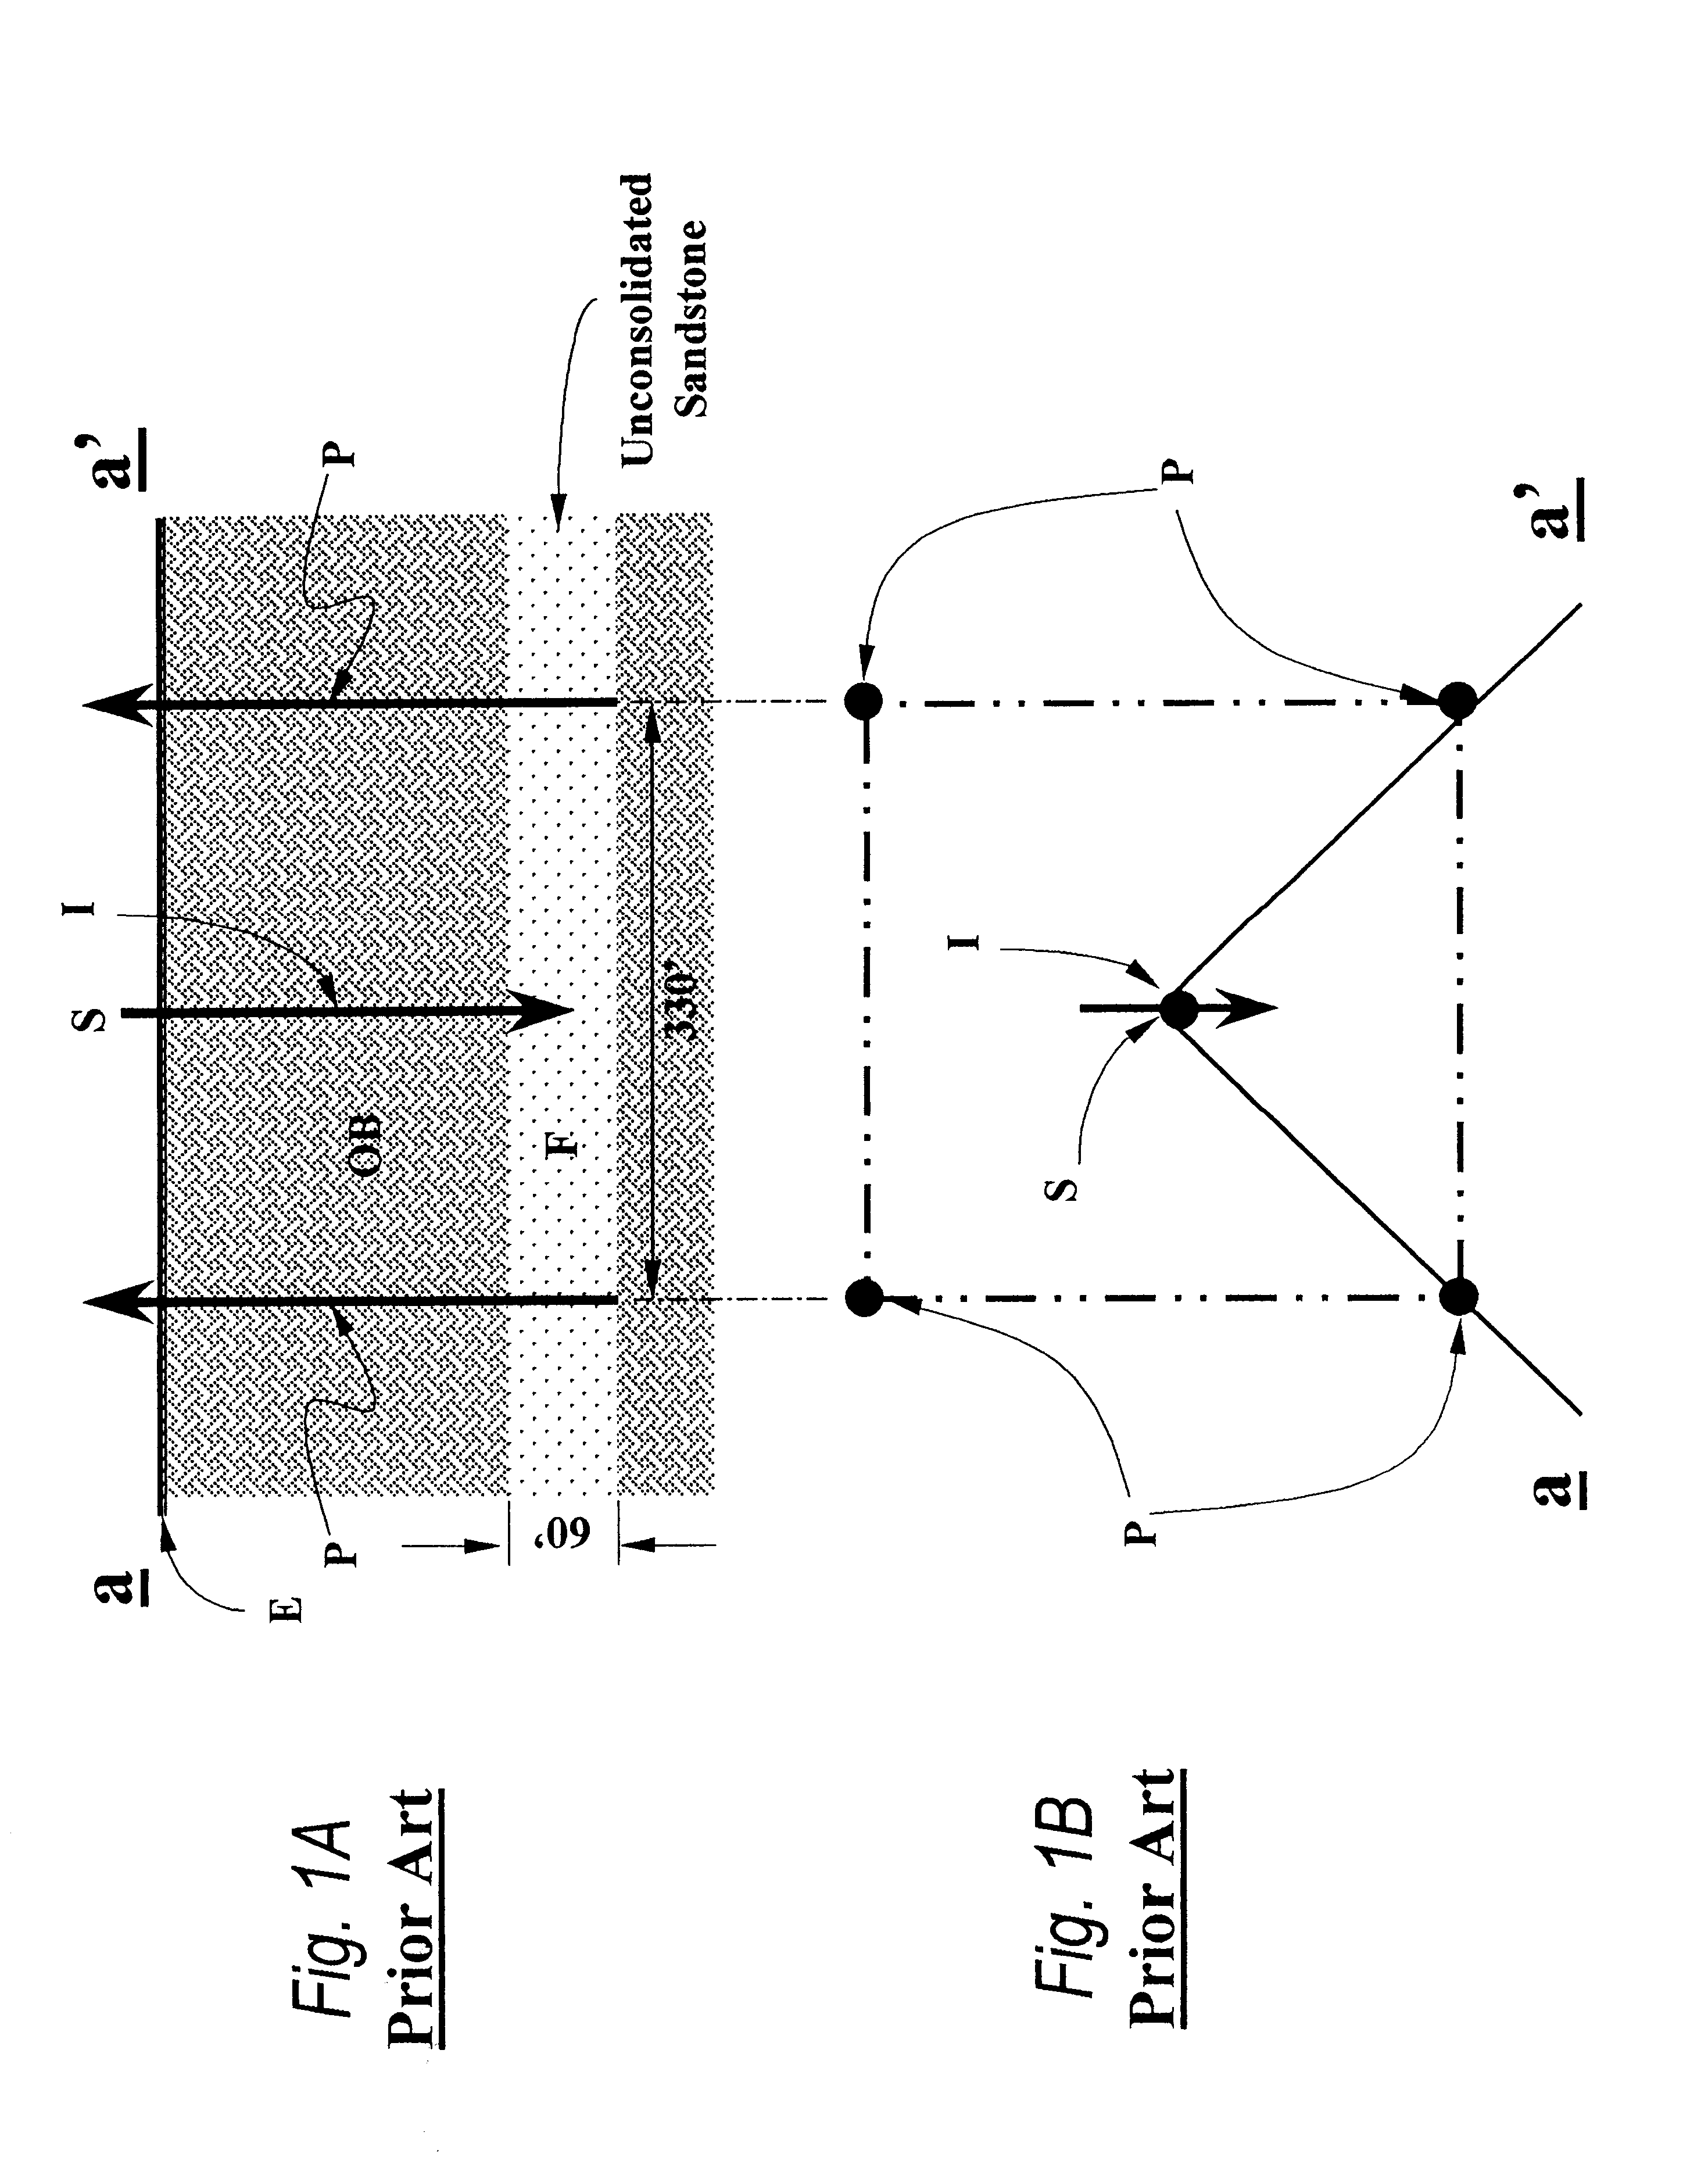 Systems and methods for hydrocarbon recovery